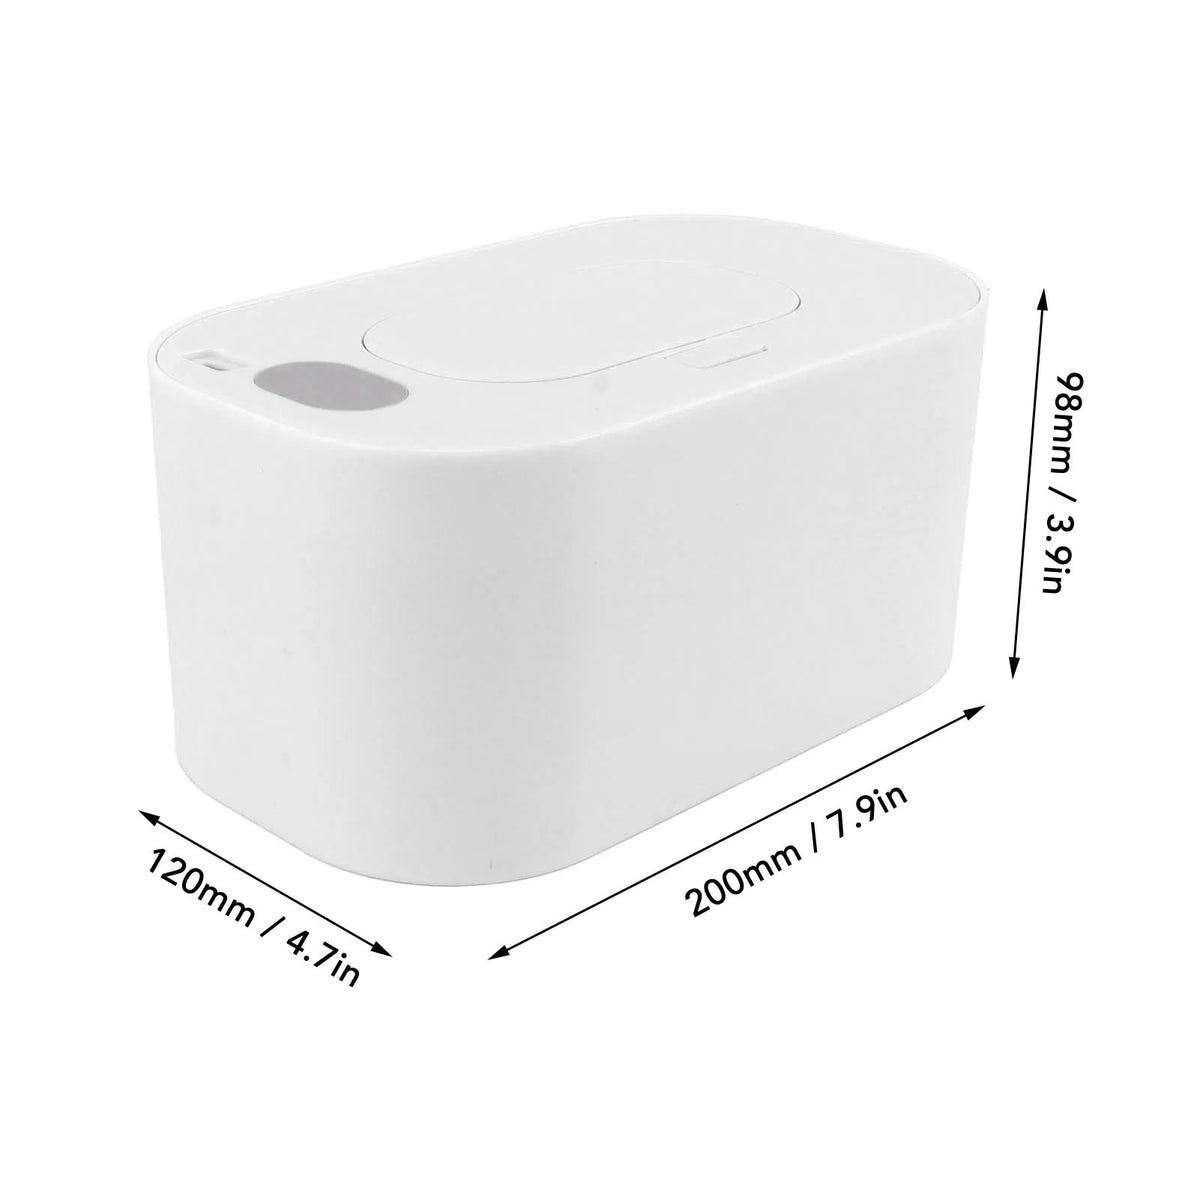 Wipe Warmer Wet Wipe Dispenser USB Powered Constant Temperature Large Capacity with Display Wipe Heater&nbsp;